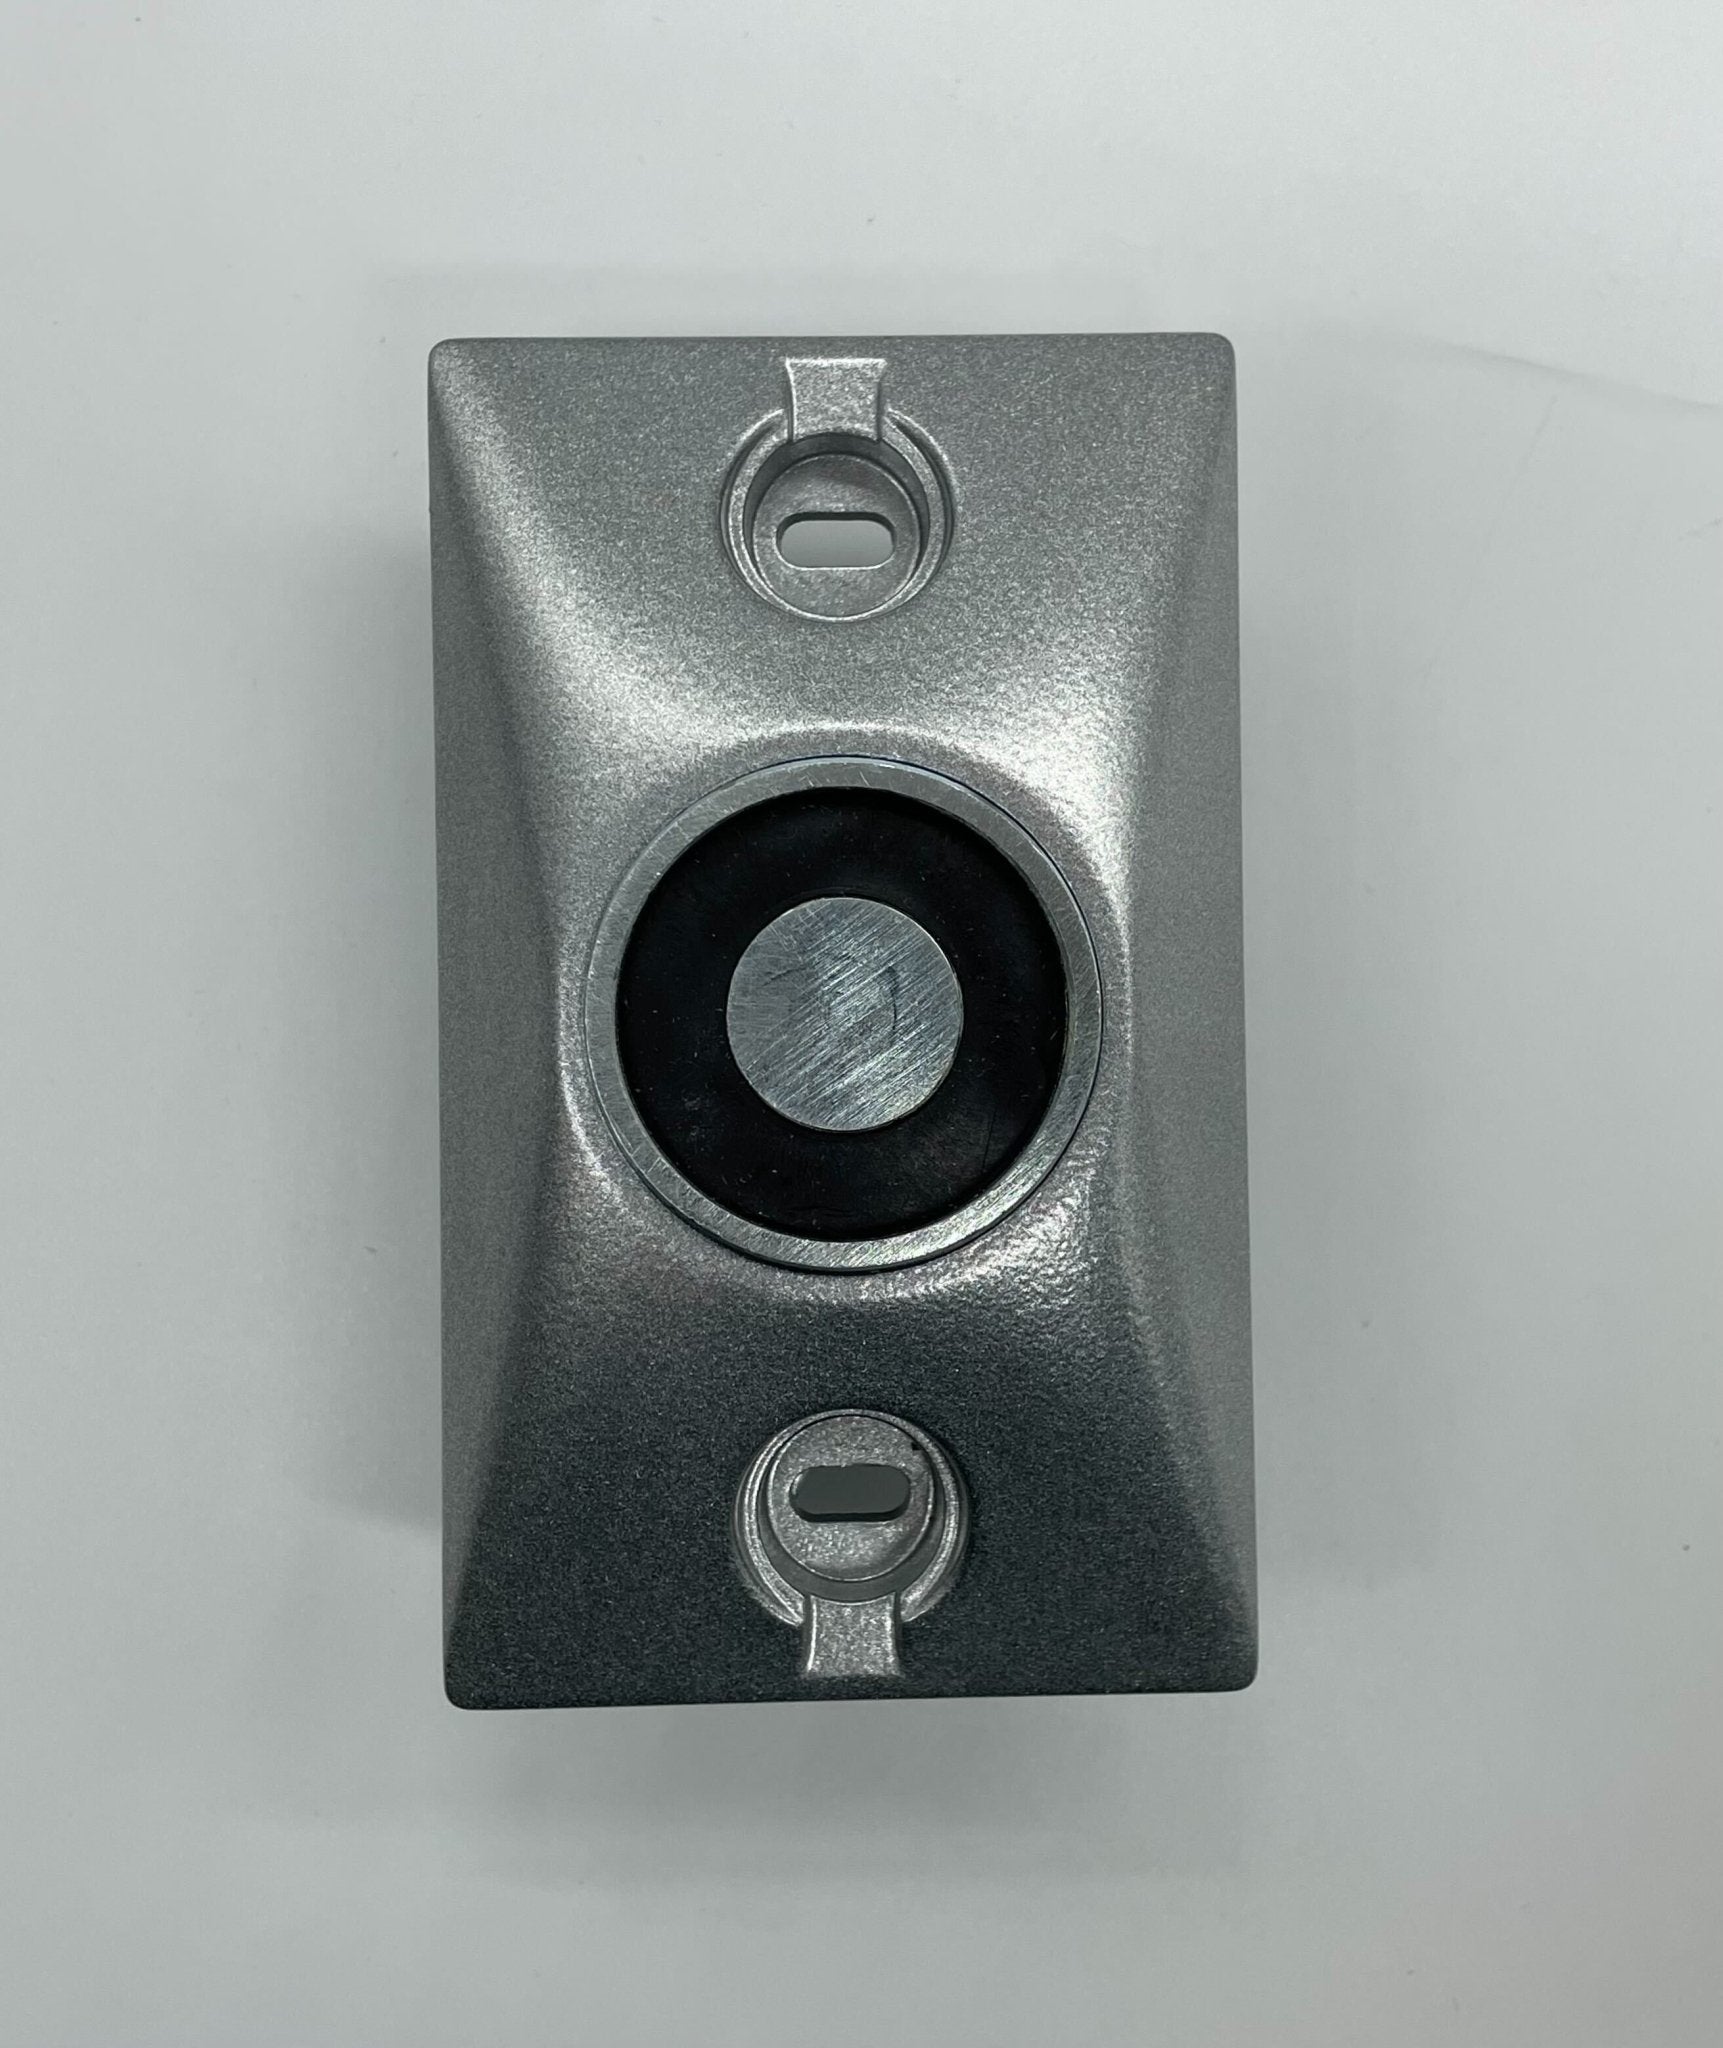 Potter DH24120FPC Electromagnetic Fire Door Holder Box - The Fire Alarm Supplier